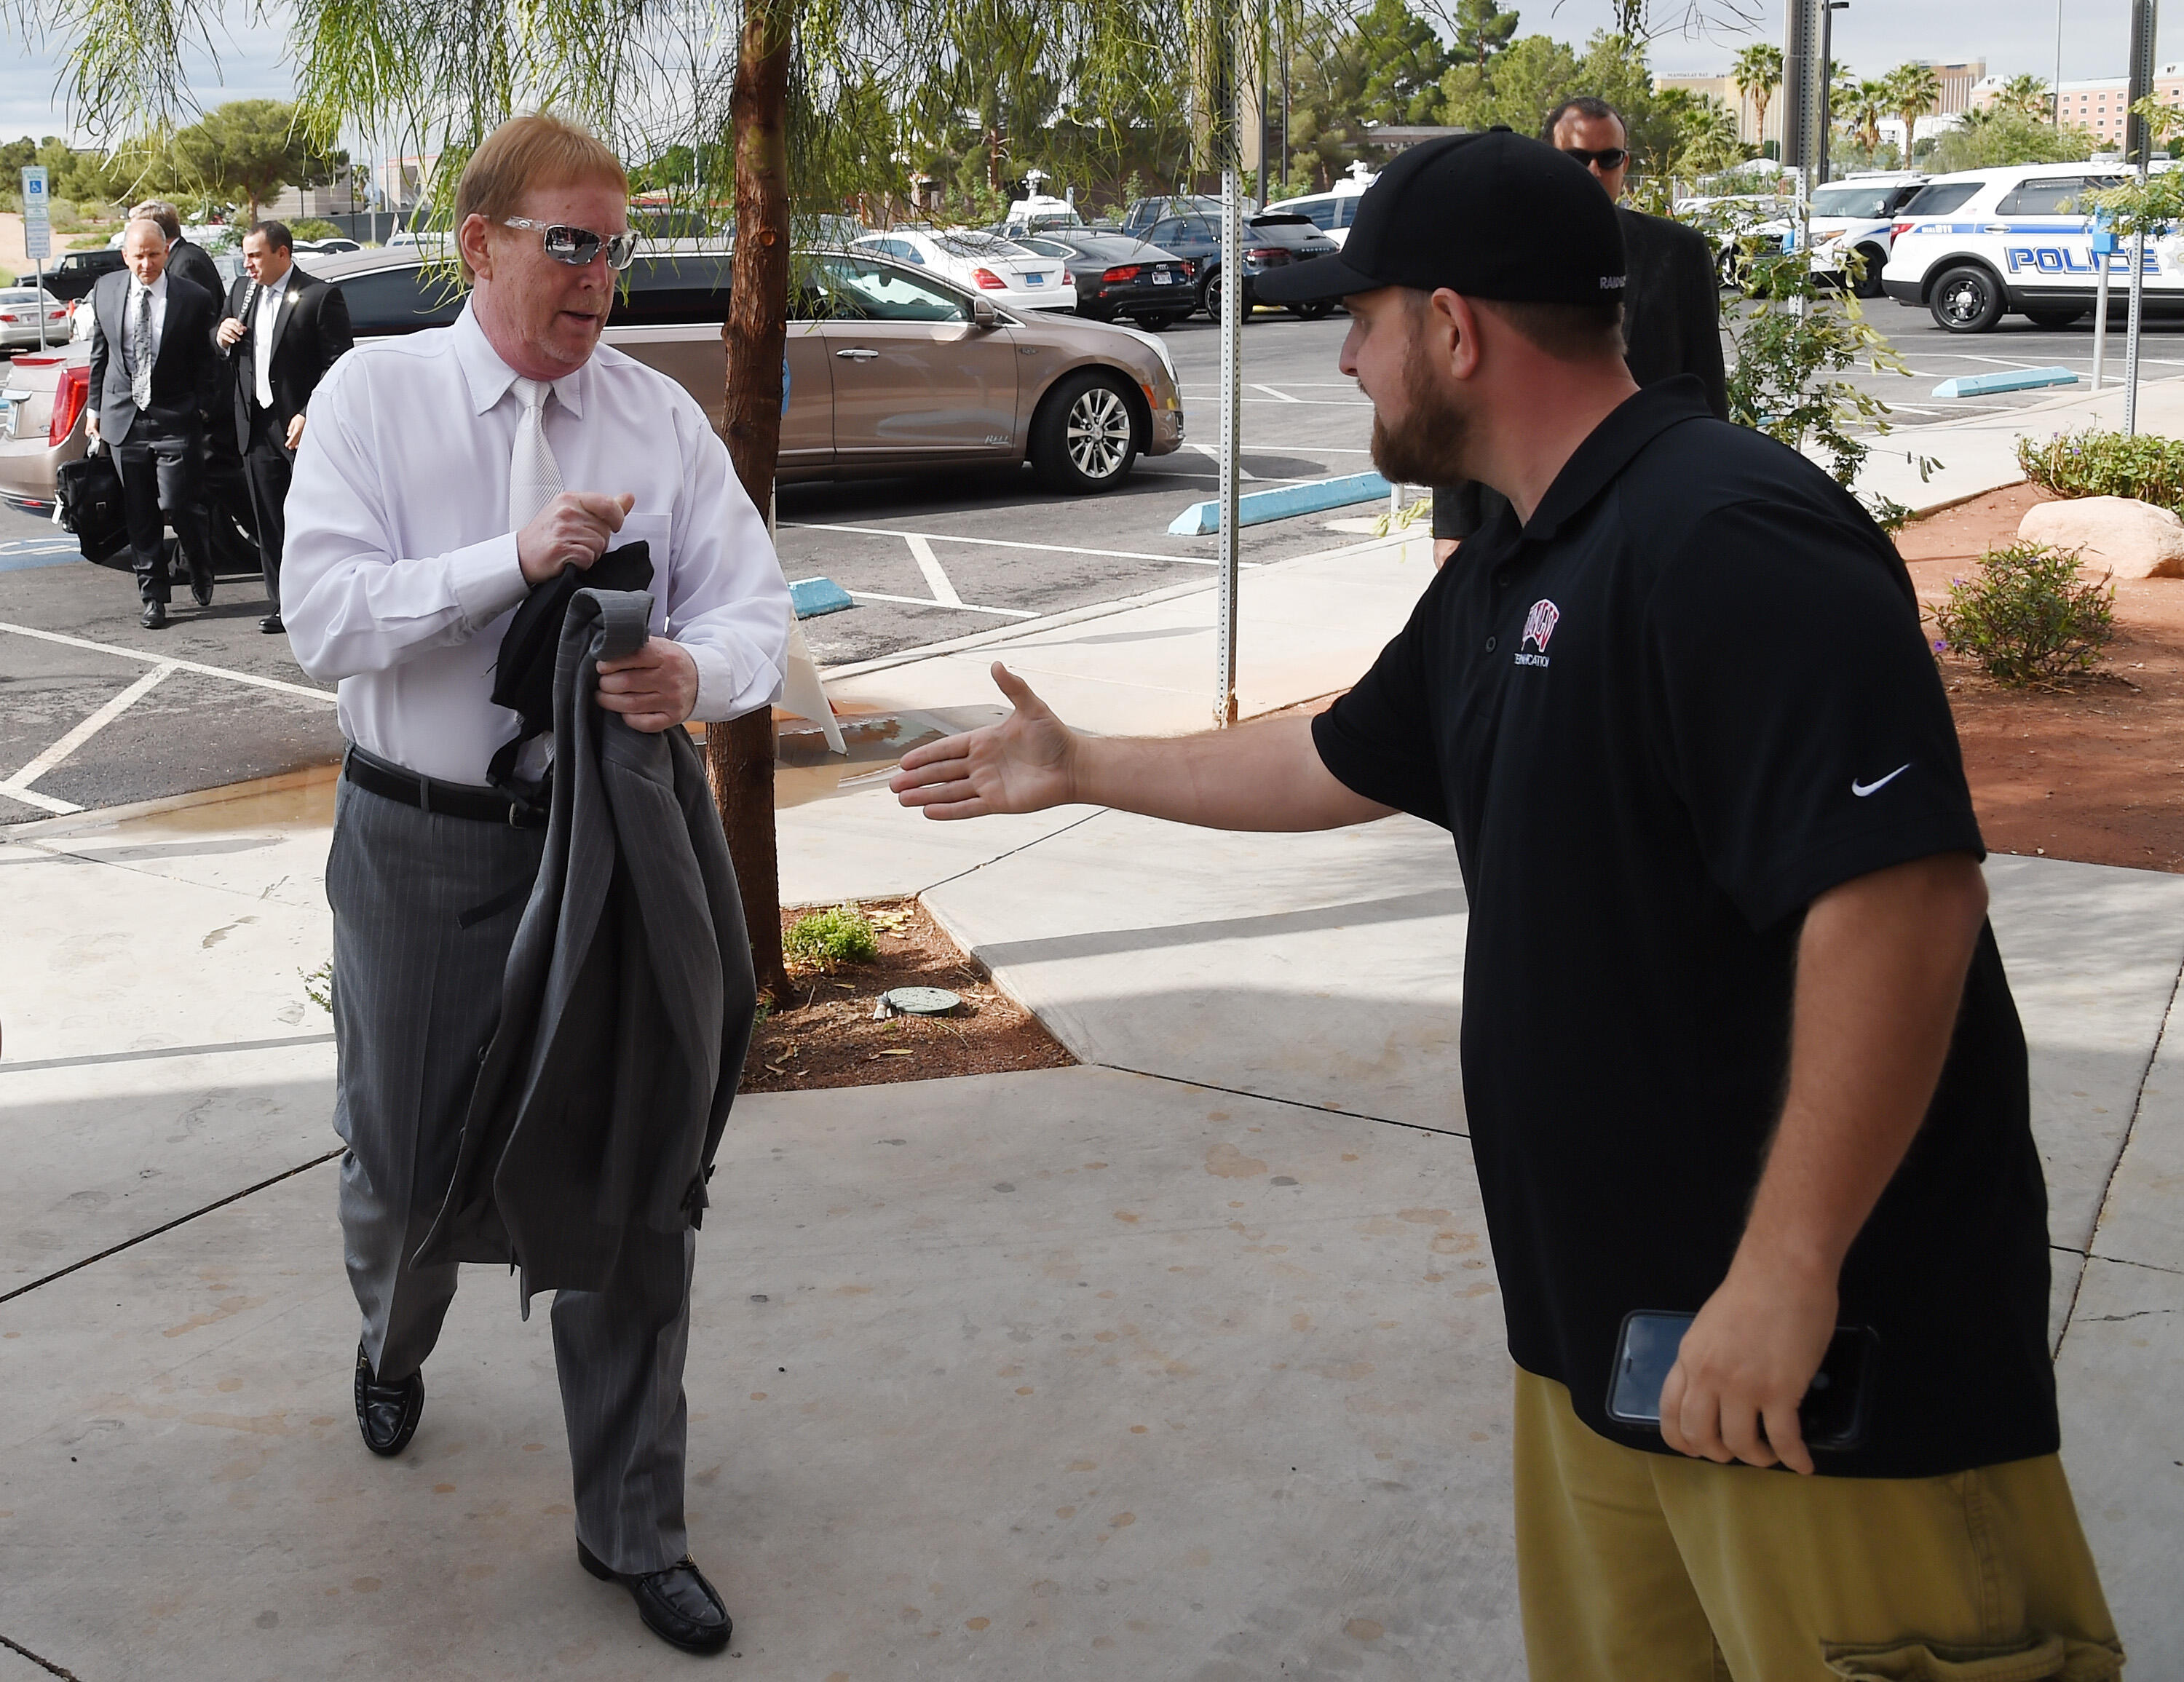 LAS VEGAS, NV - APRIL 28:  Oakland Raiders owner Mark Davis (L) is greeted as he arrives at a Southern Nevada Tourism Infrastructure Committee meeting at UNLV on April 28, 2016 in Las Vegas, Nevada. Davis told the committee he is willing to spend USD 500 